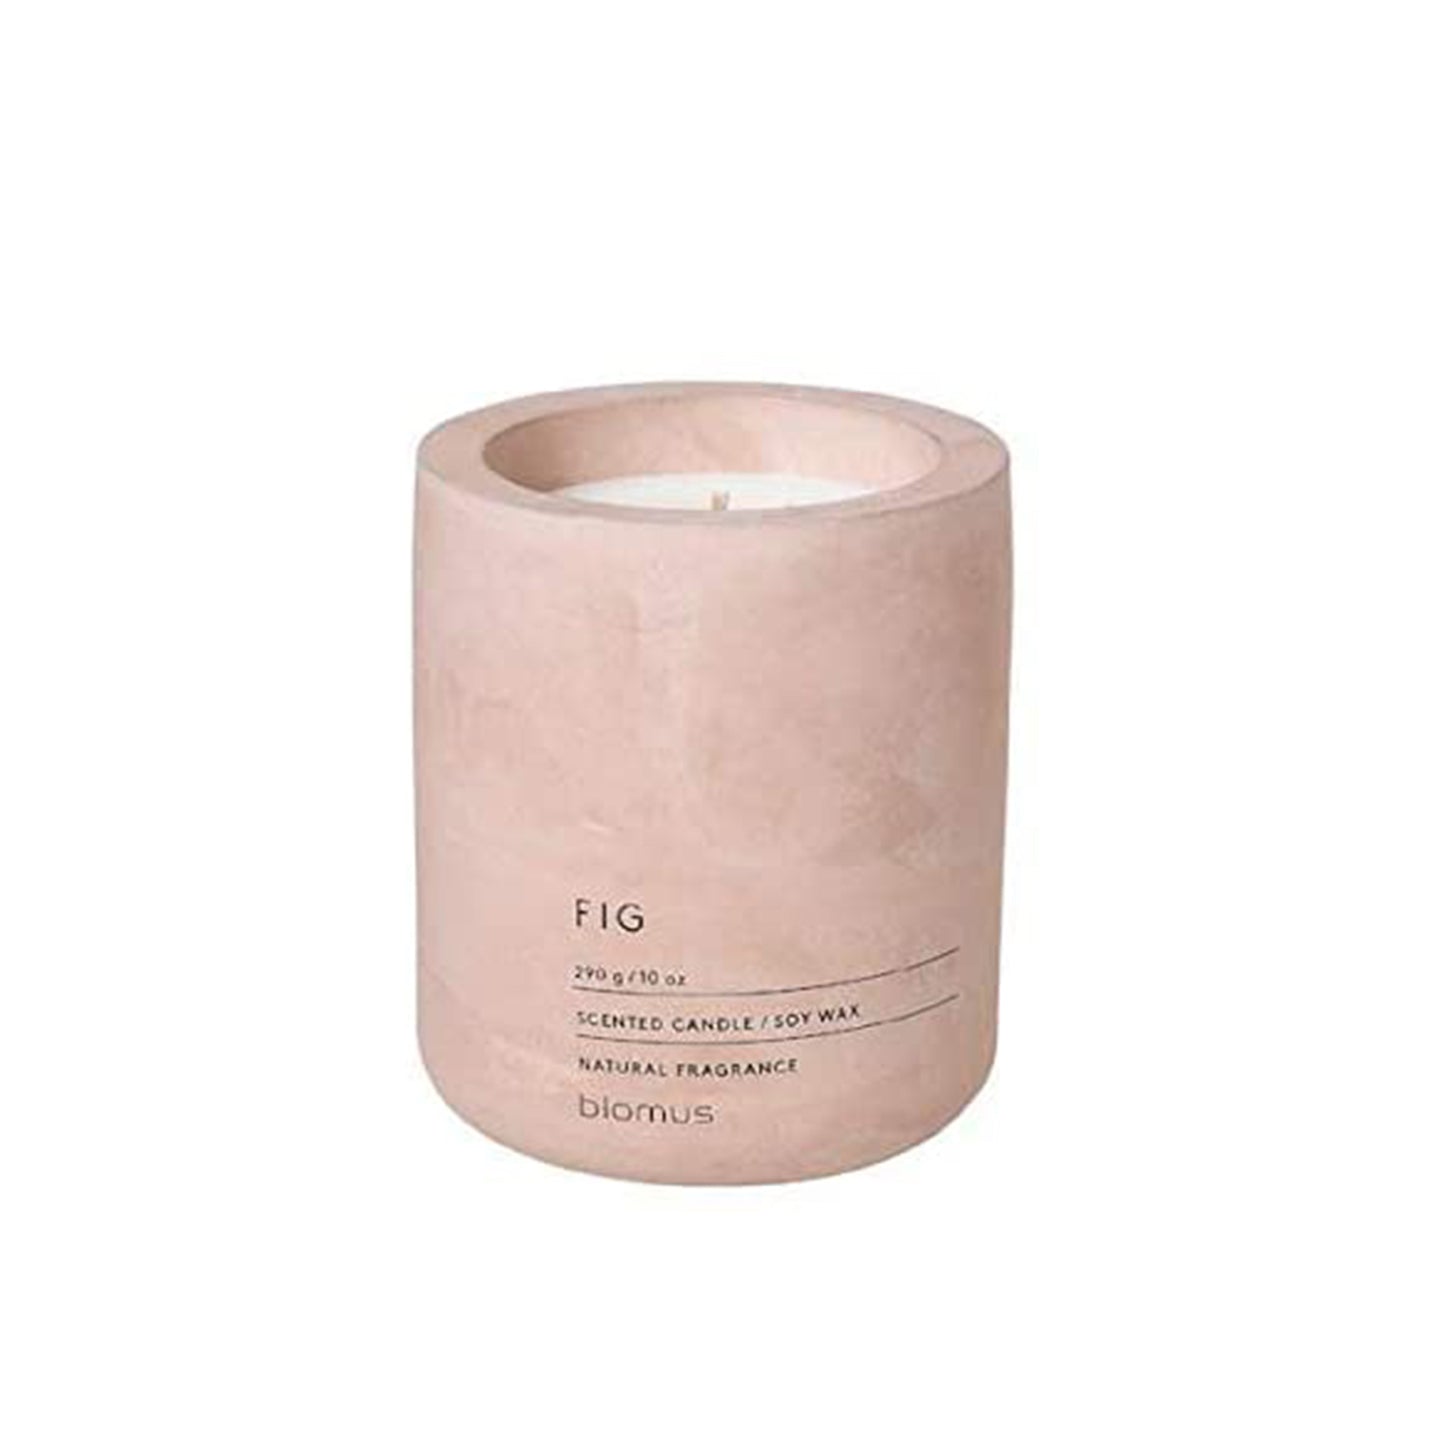 Pink concrete Fig scented candle on a white background